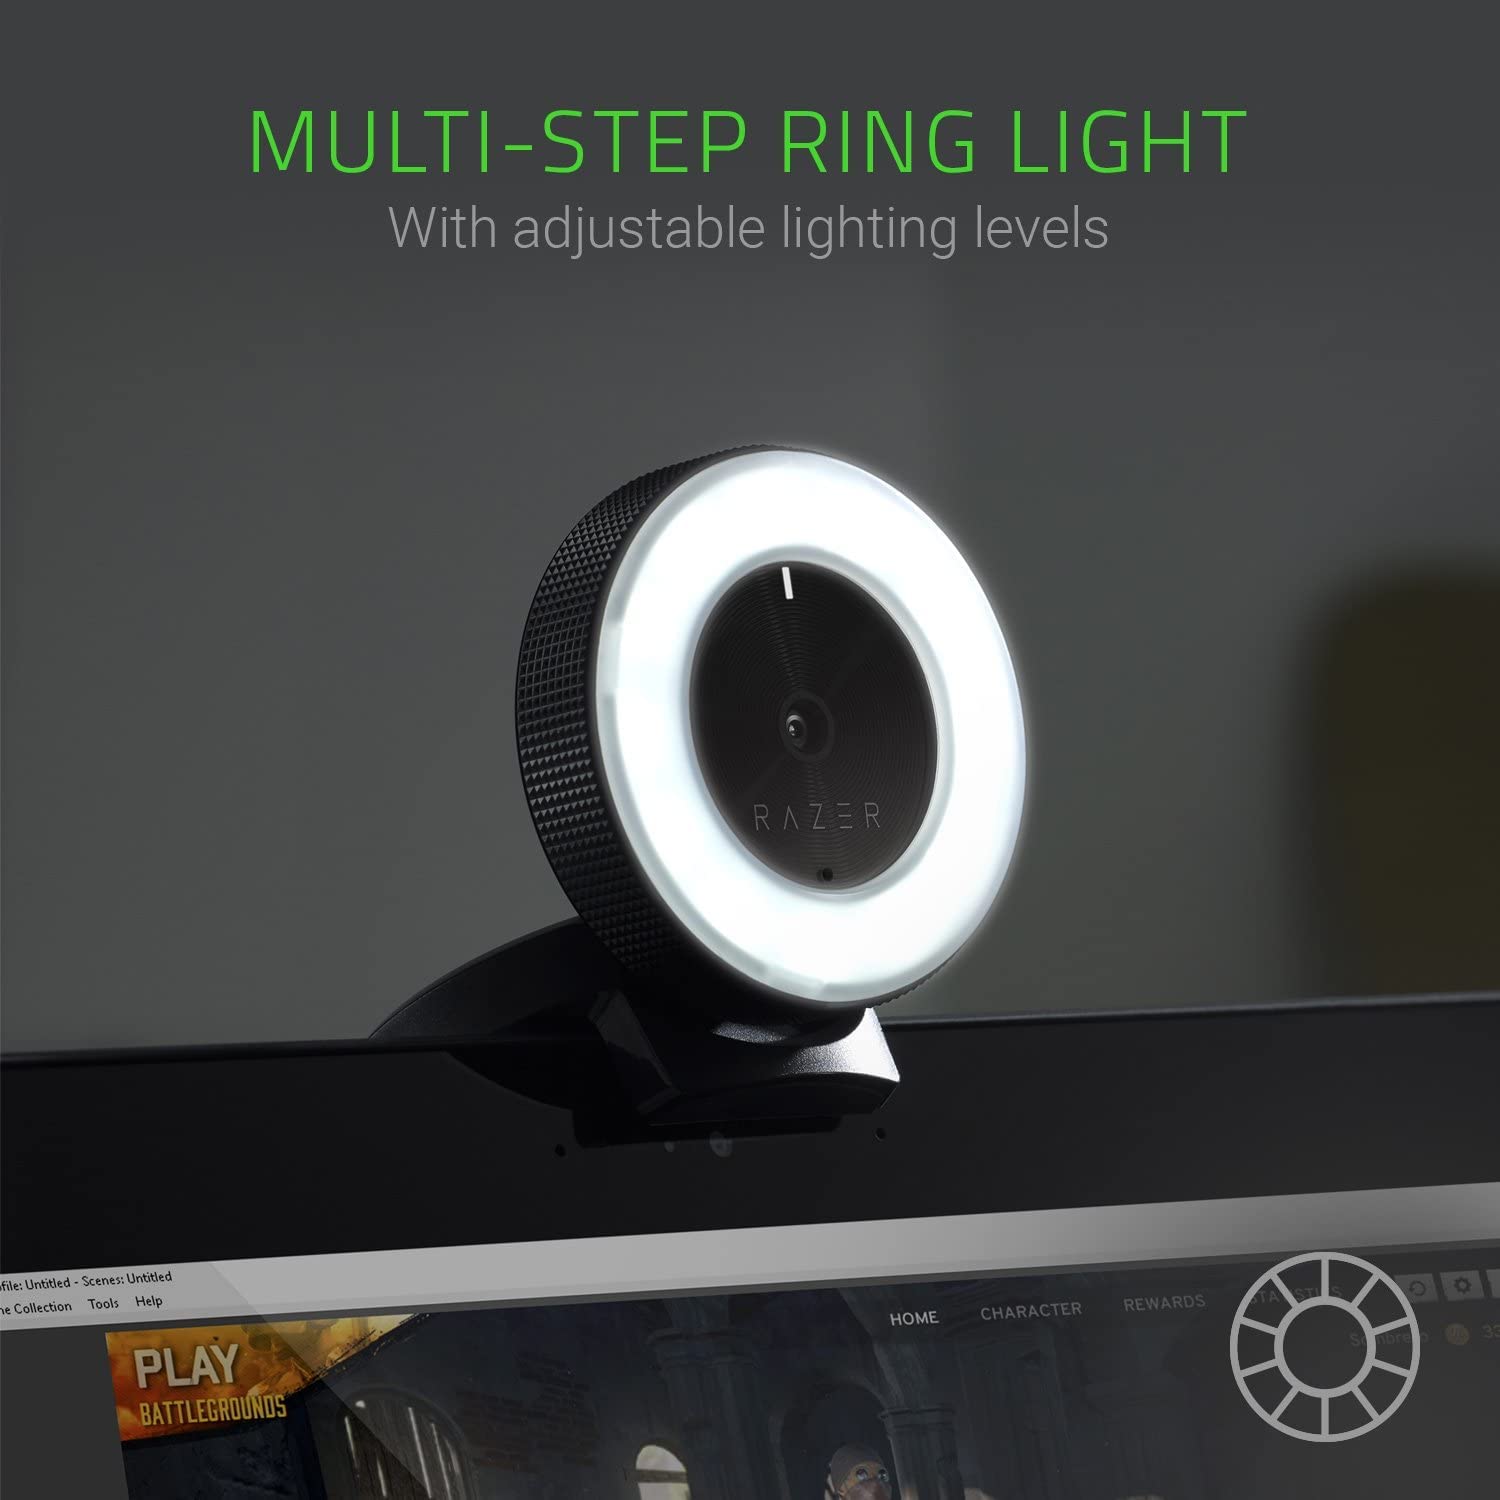 Razer Kiyo 1080p 30 FPS/720 p 60 FPS Streaming Webcam with Adjustable Brightness Ring Light, Built-in Microphone and Advanced Autofocus